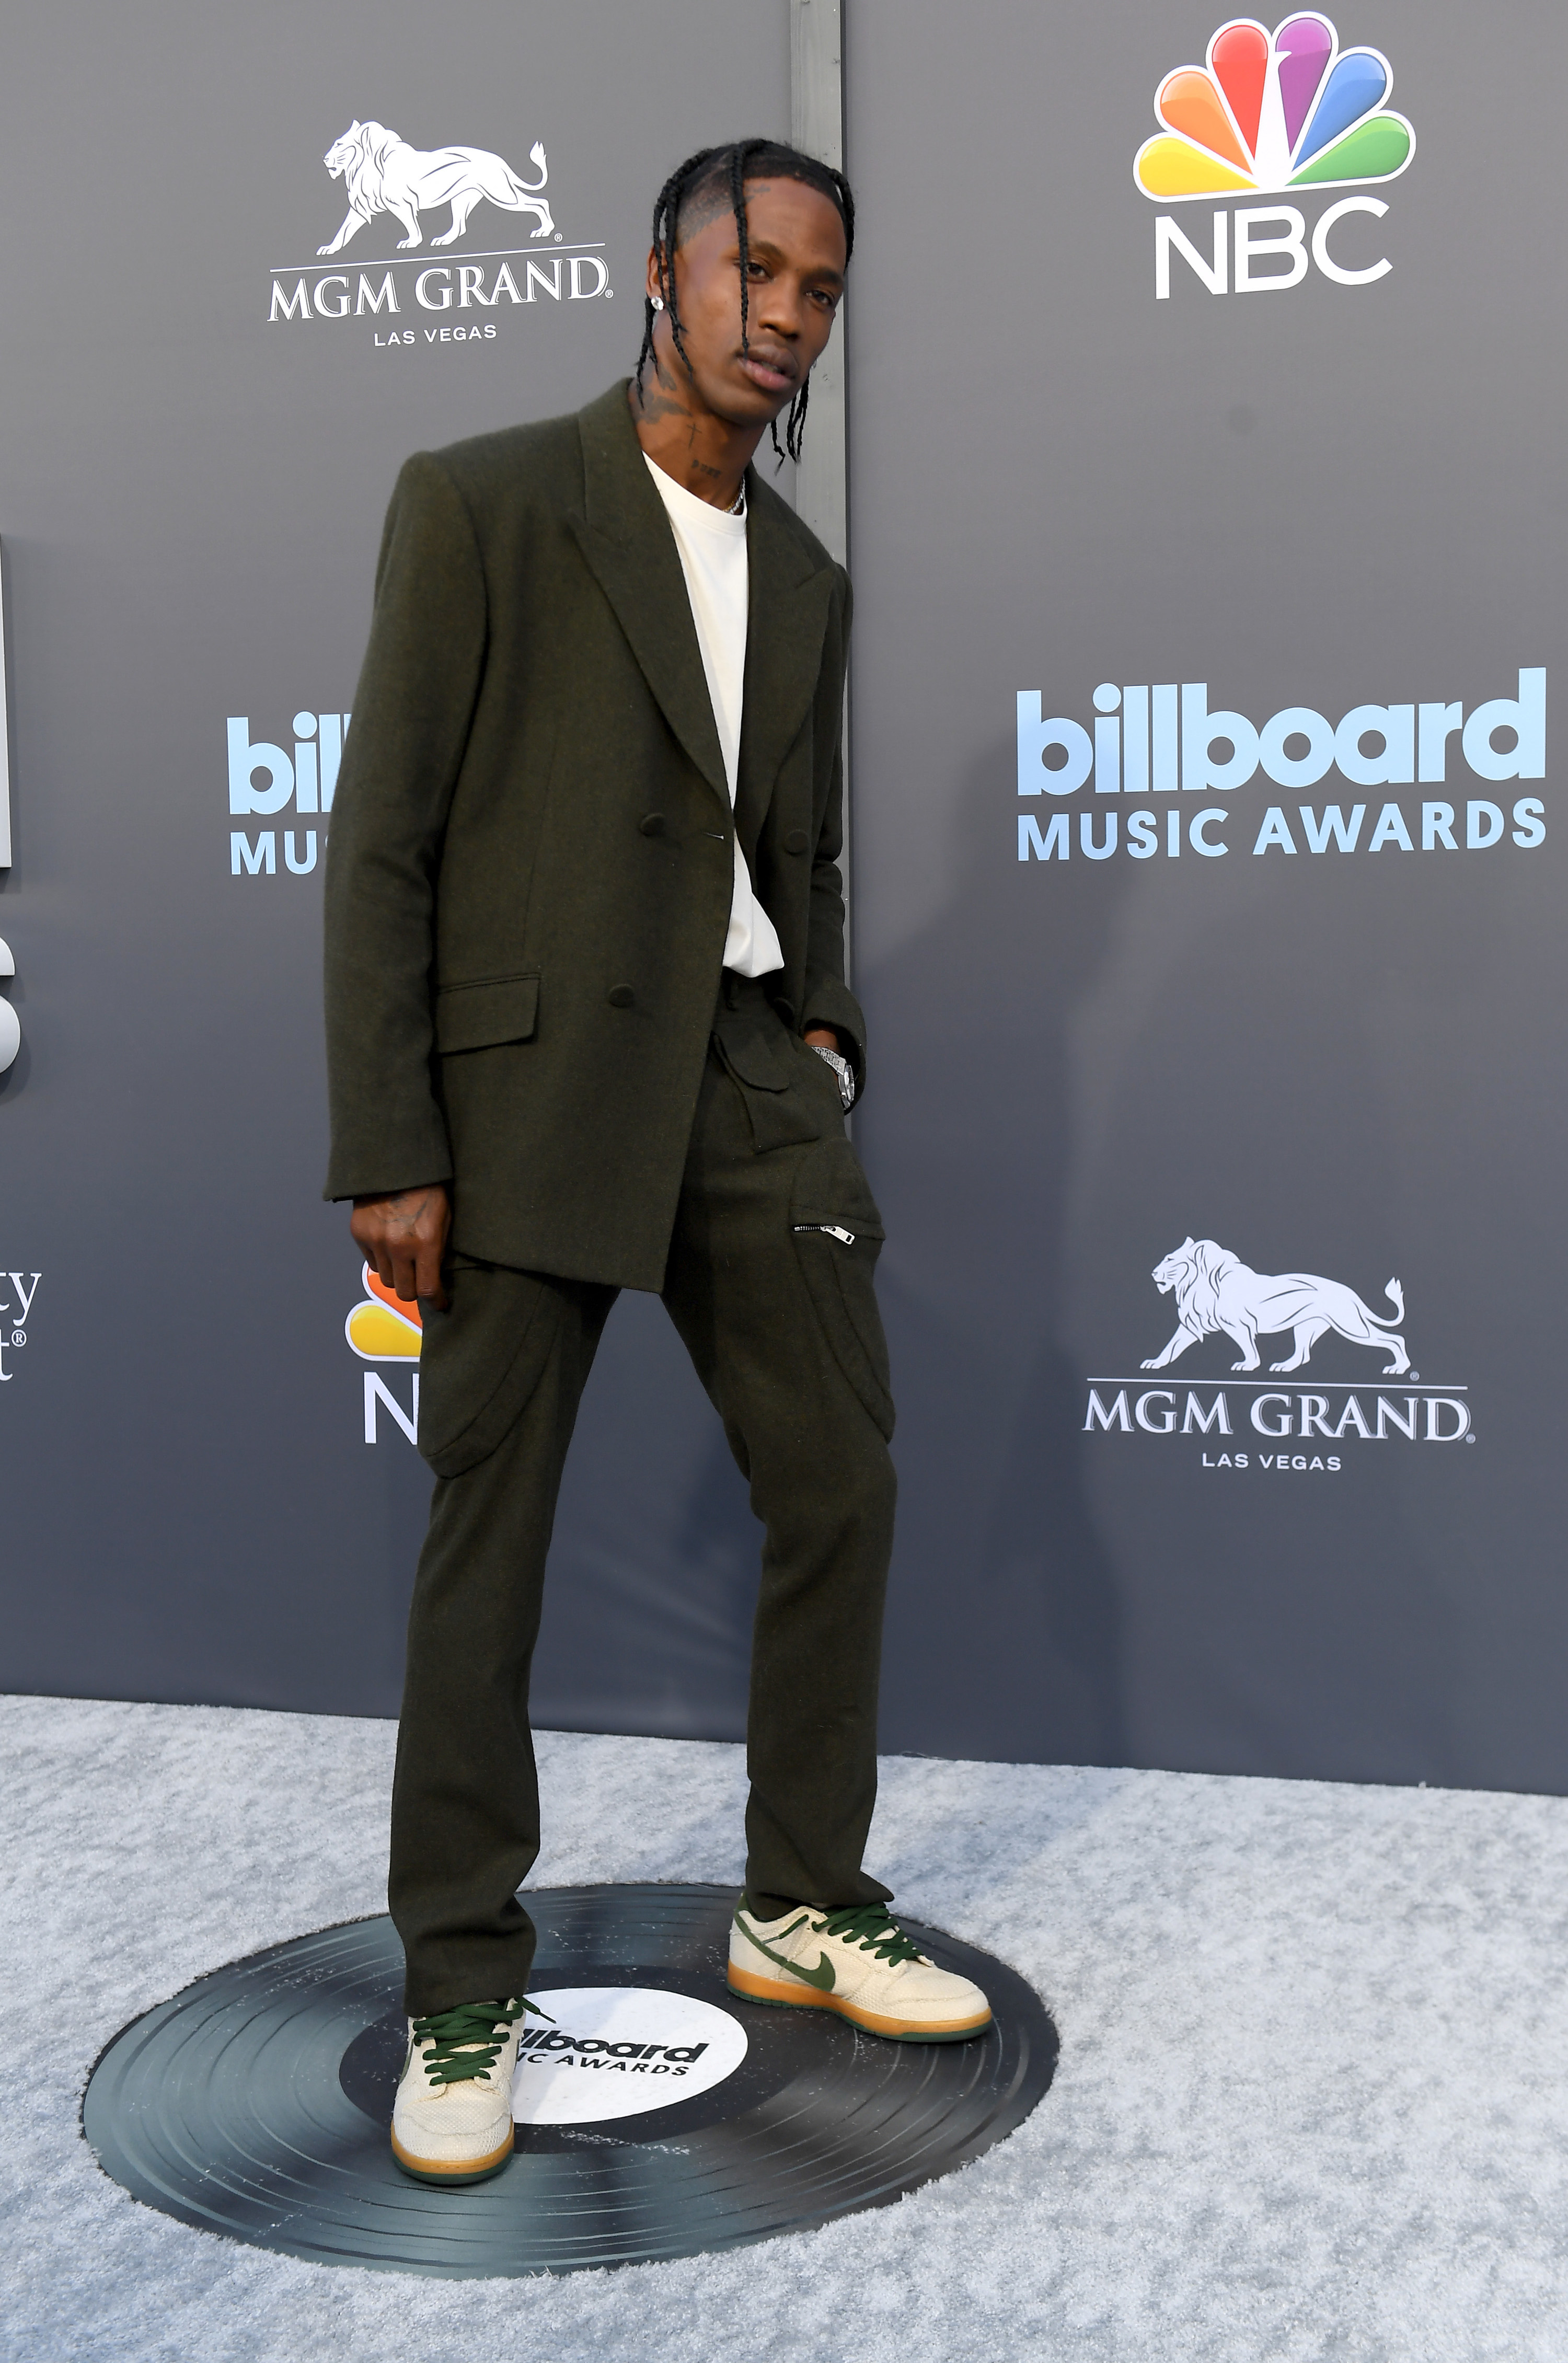 Travis poses for photos at the Billboard Music Awards